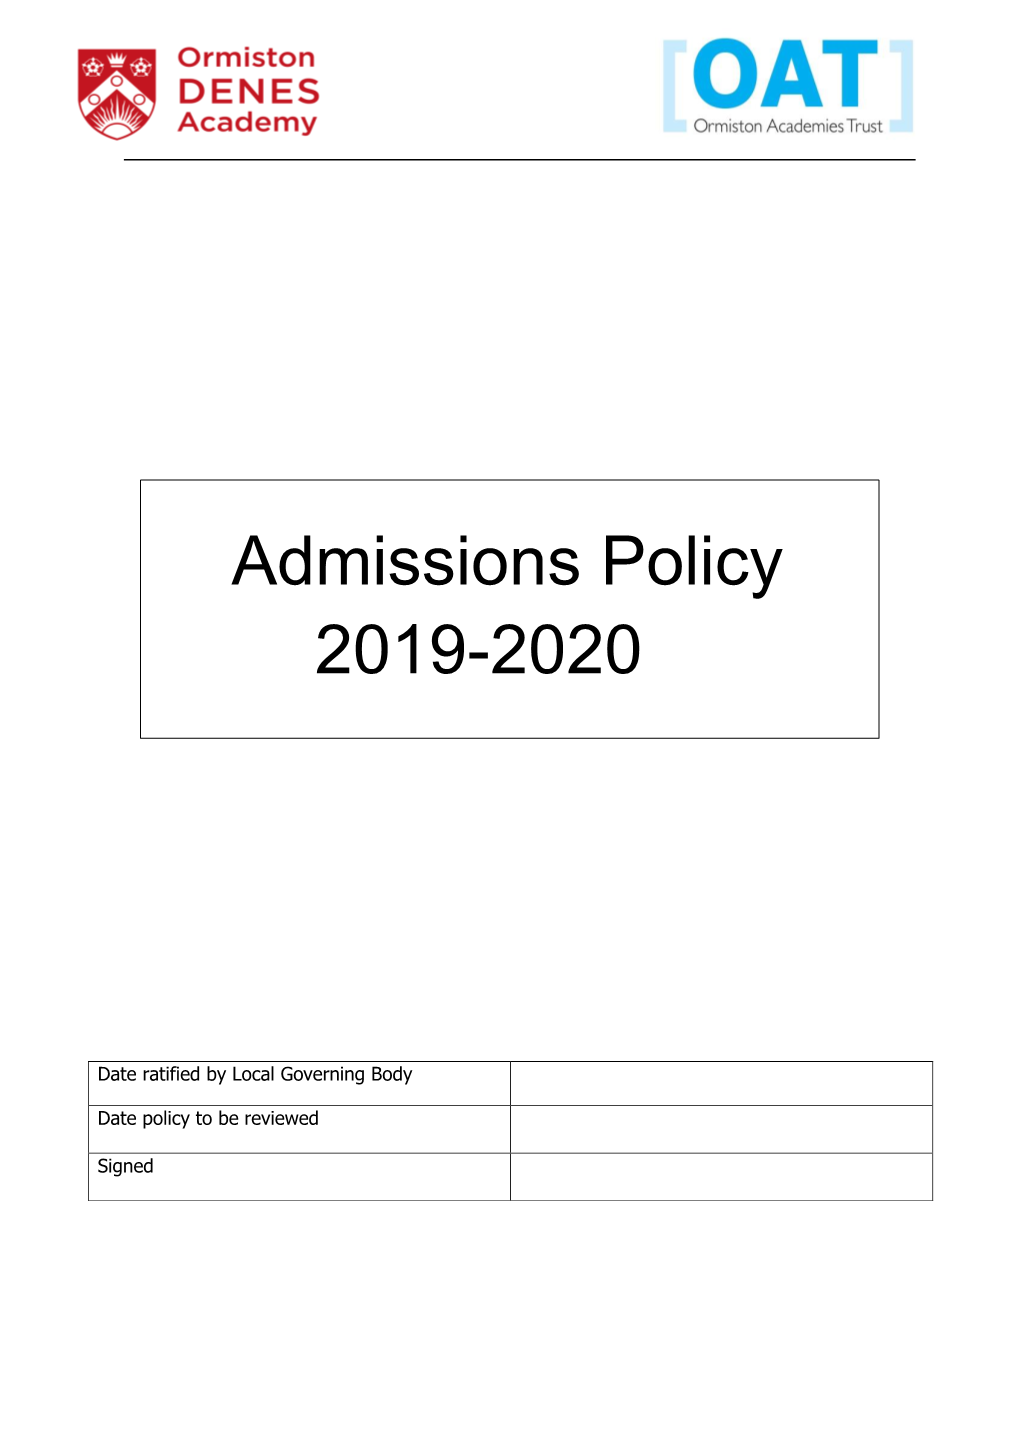 Admissions Policy 2019-2020